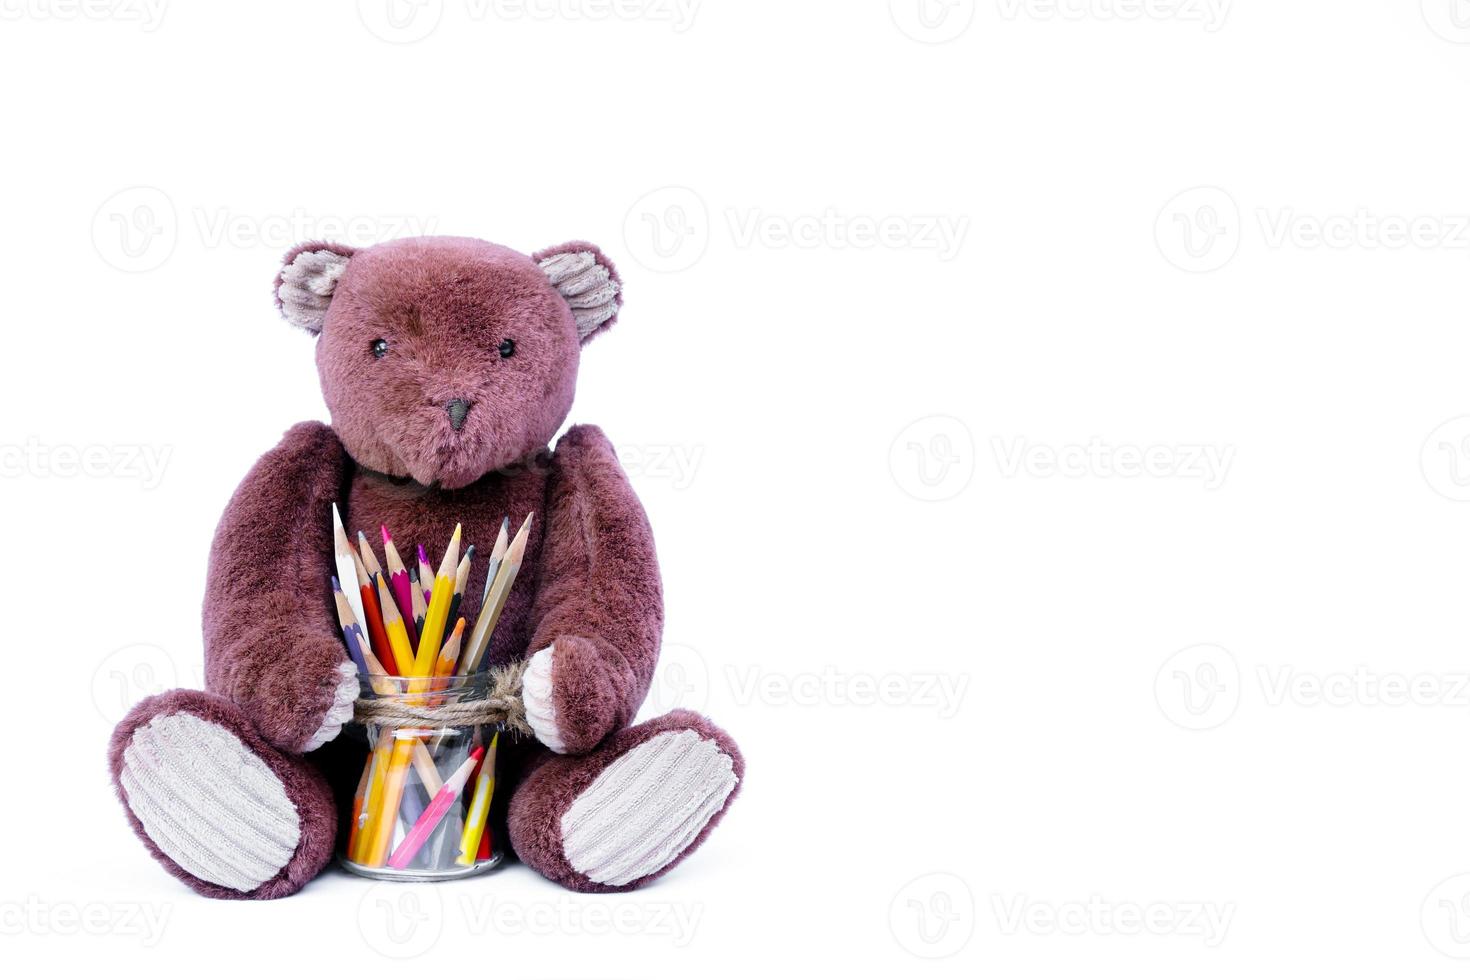 Brown teddy bear doll sitting with colorful pencils in a glass isolated on white,for education back to school background photo